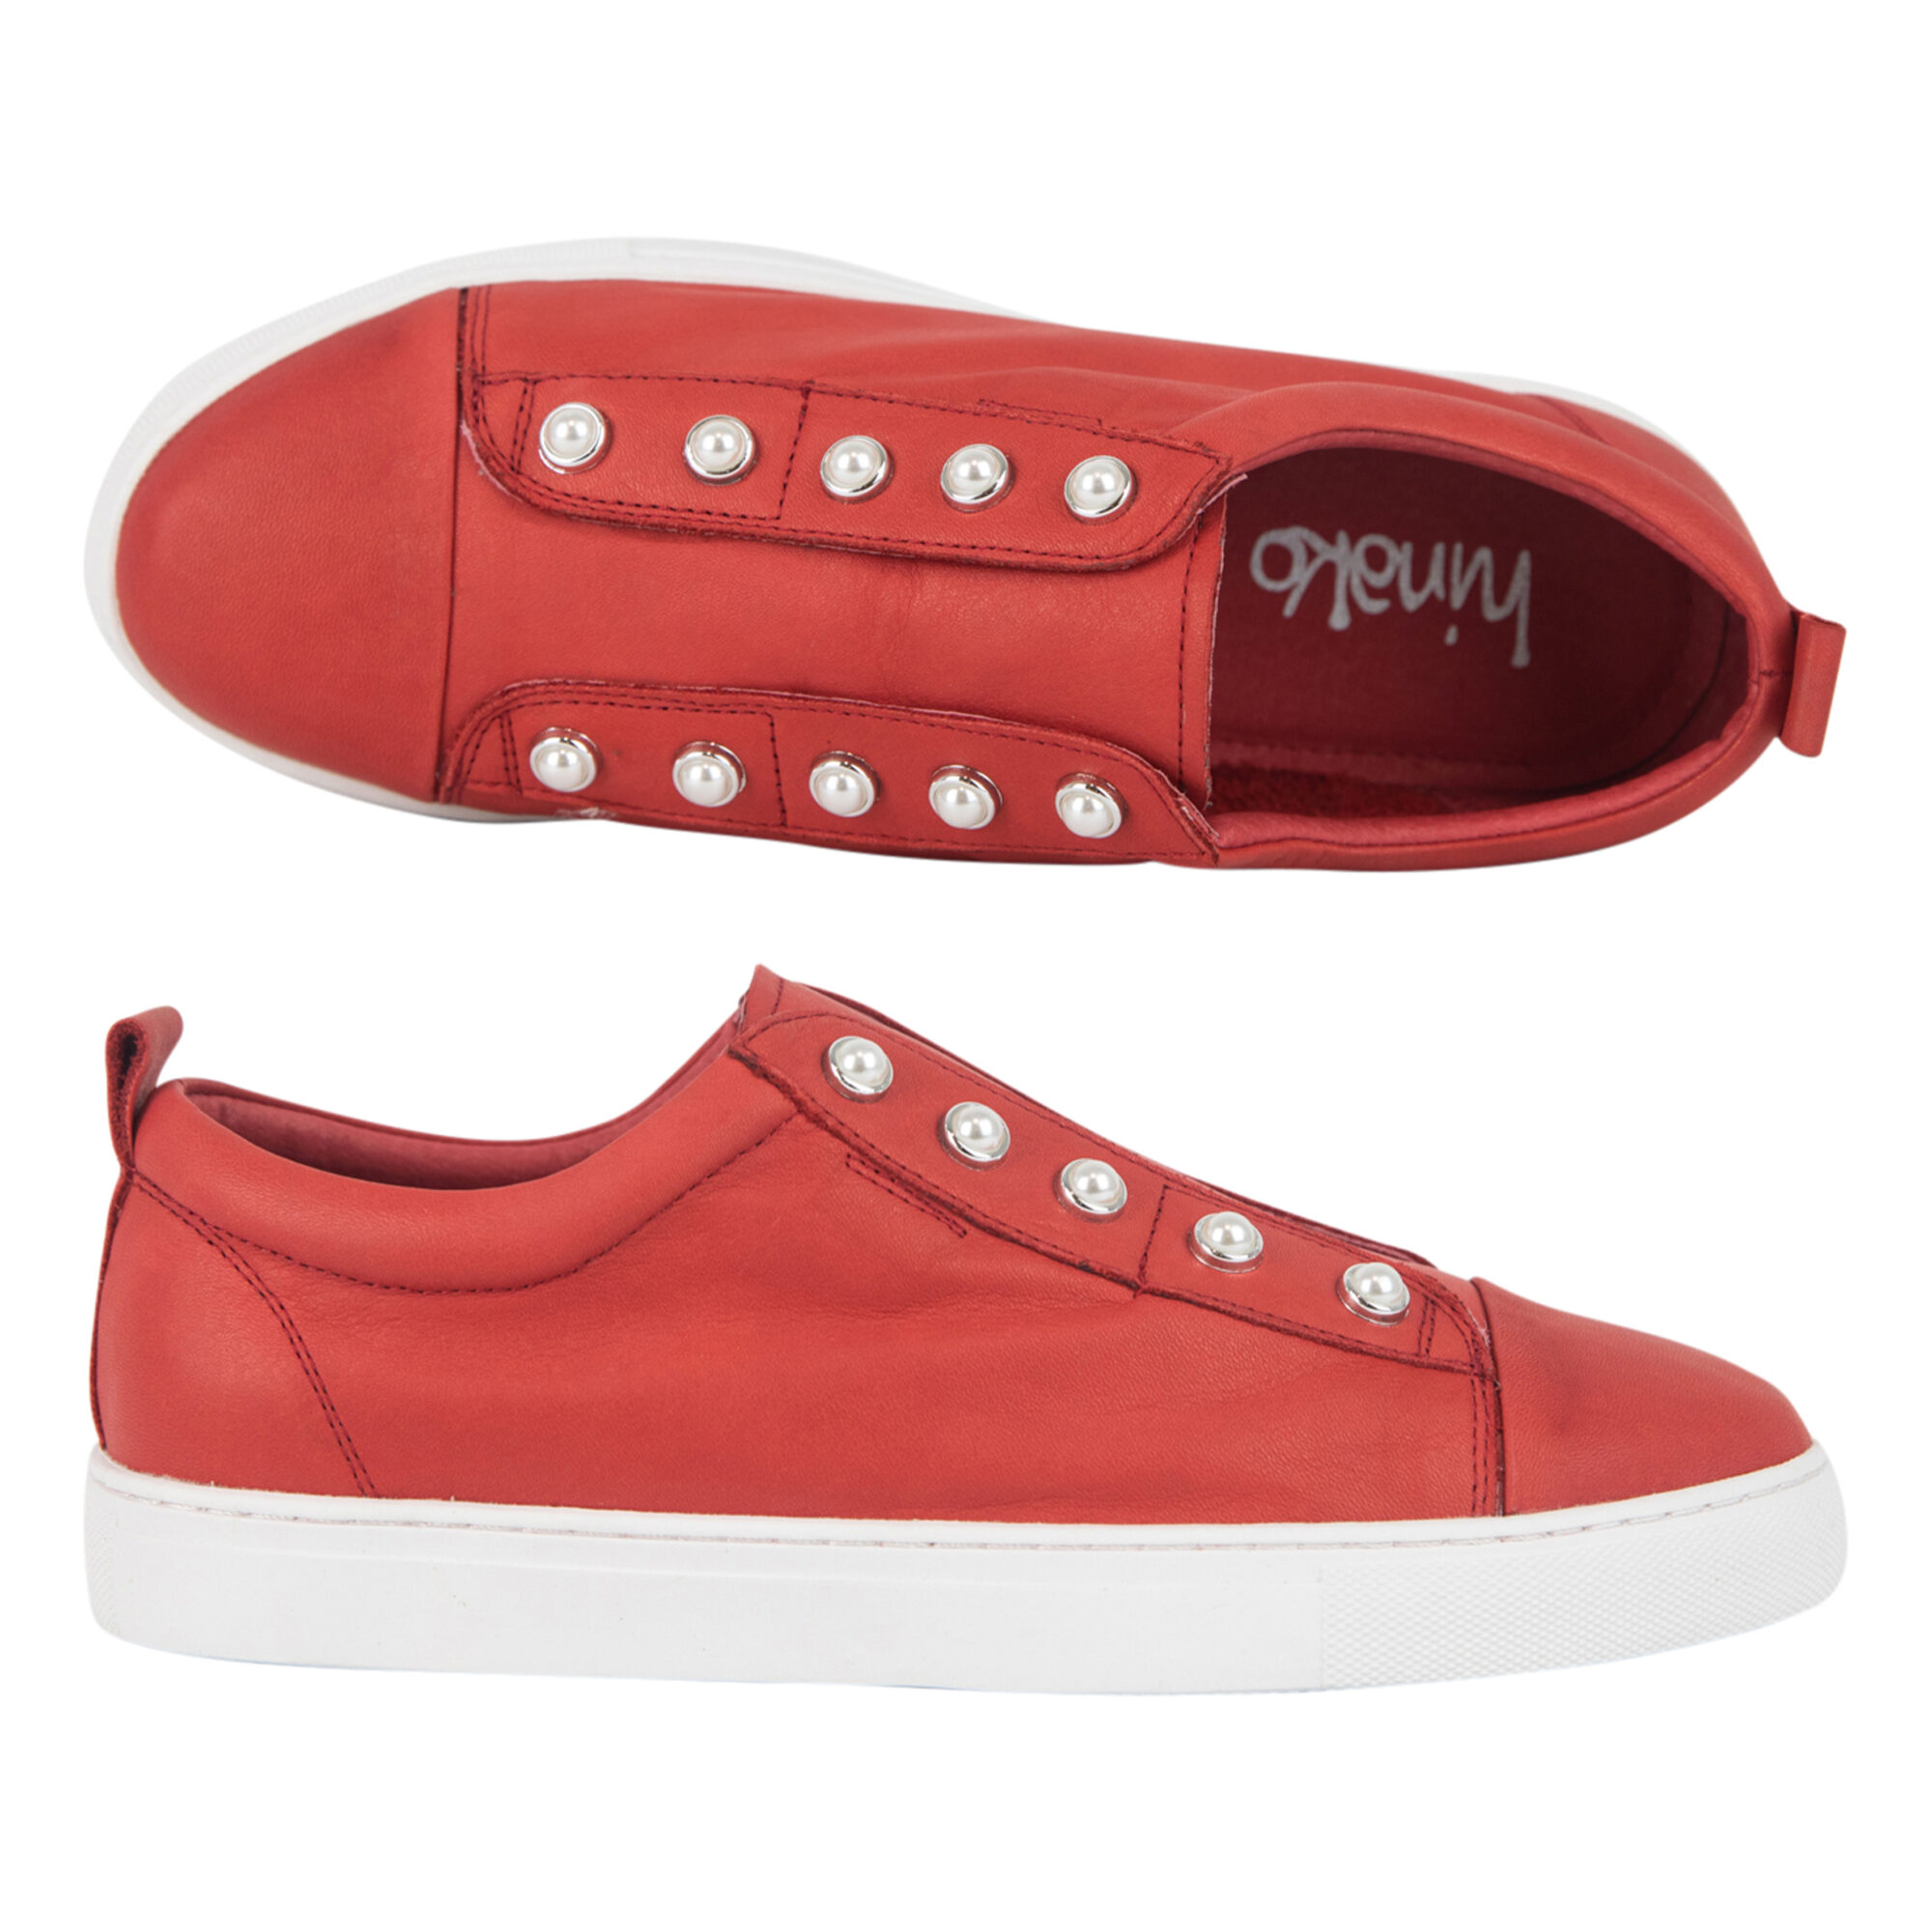 Pearl - Salsa Red - The Shoe Collective